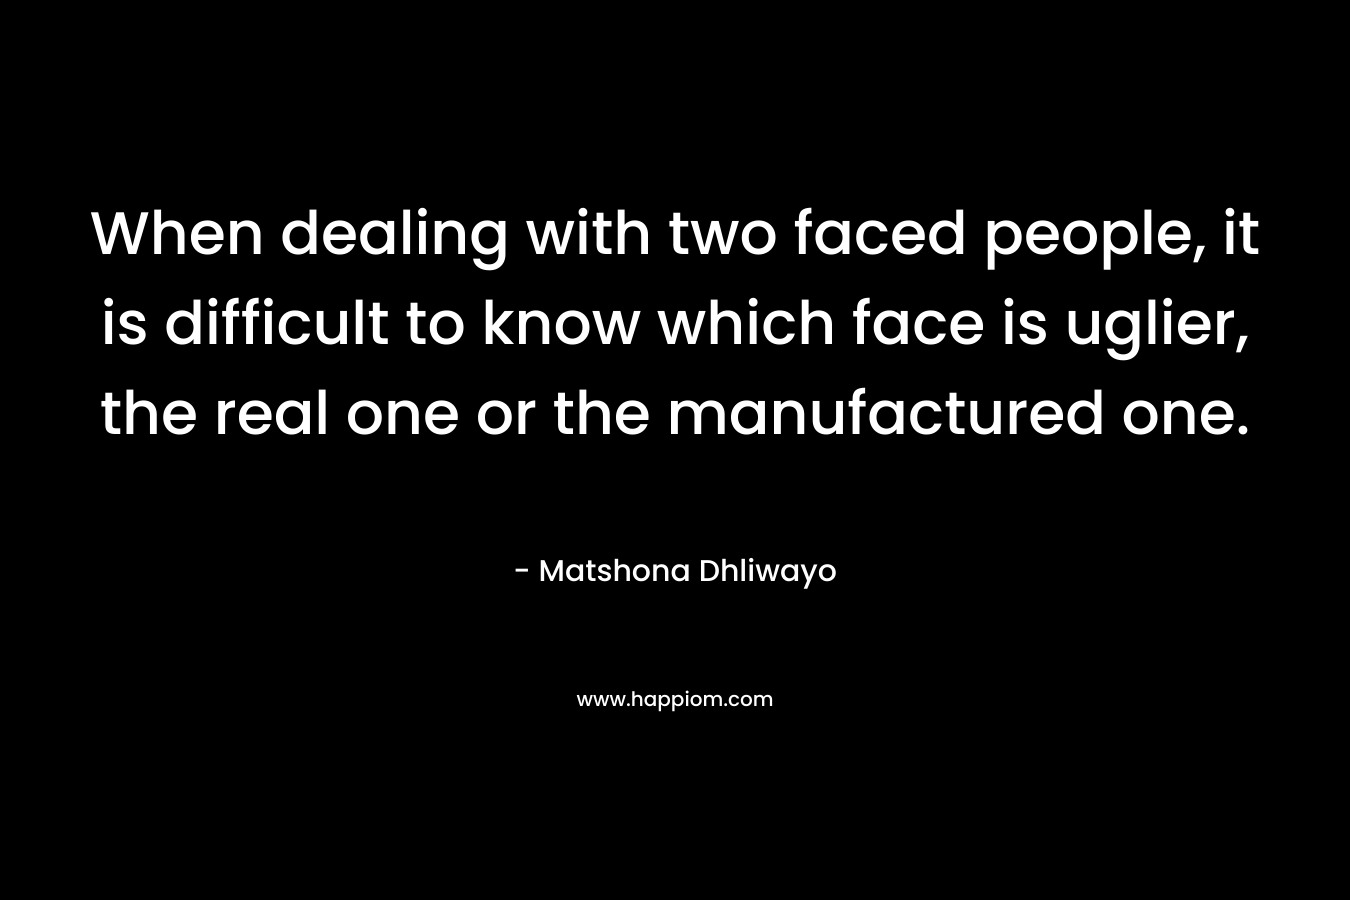 When dealing with two faced people, it is difficult to know which face is uglier, the real one or the manufactured one. – Matshona Dhliwayo